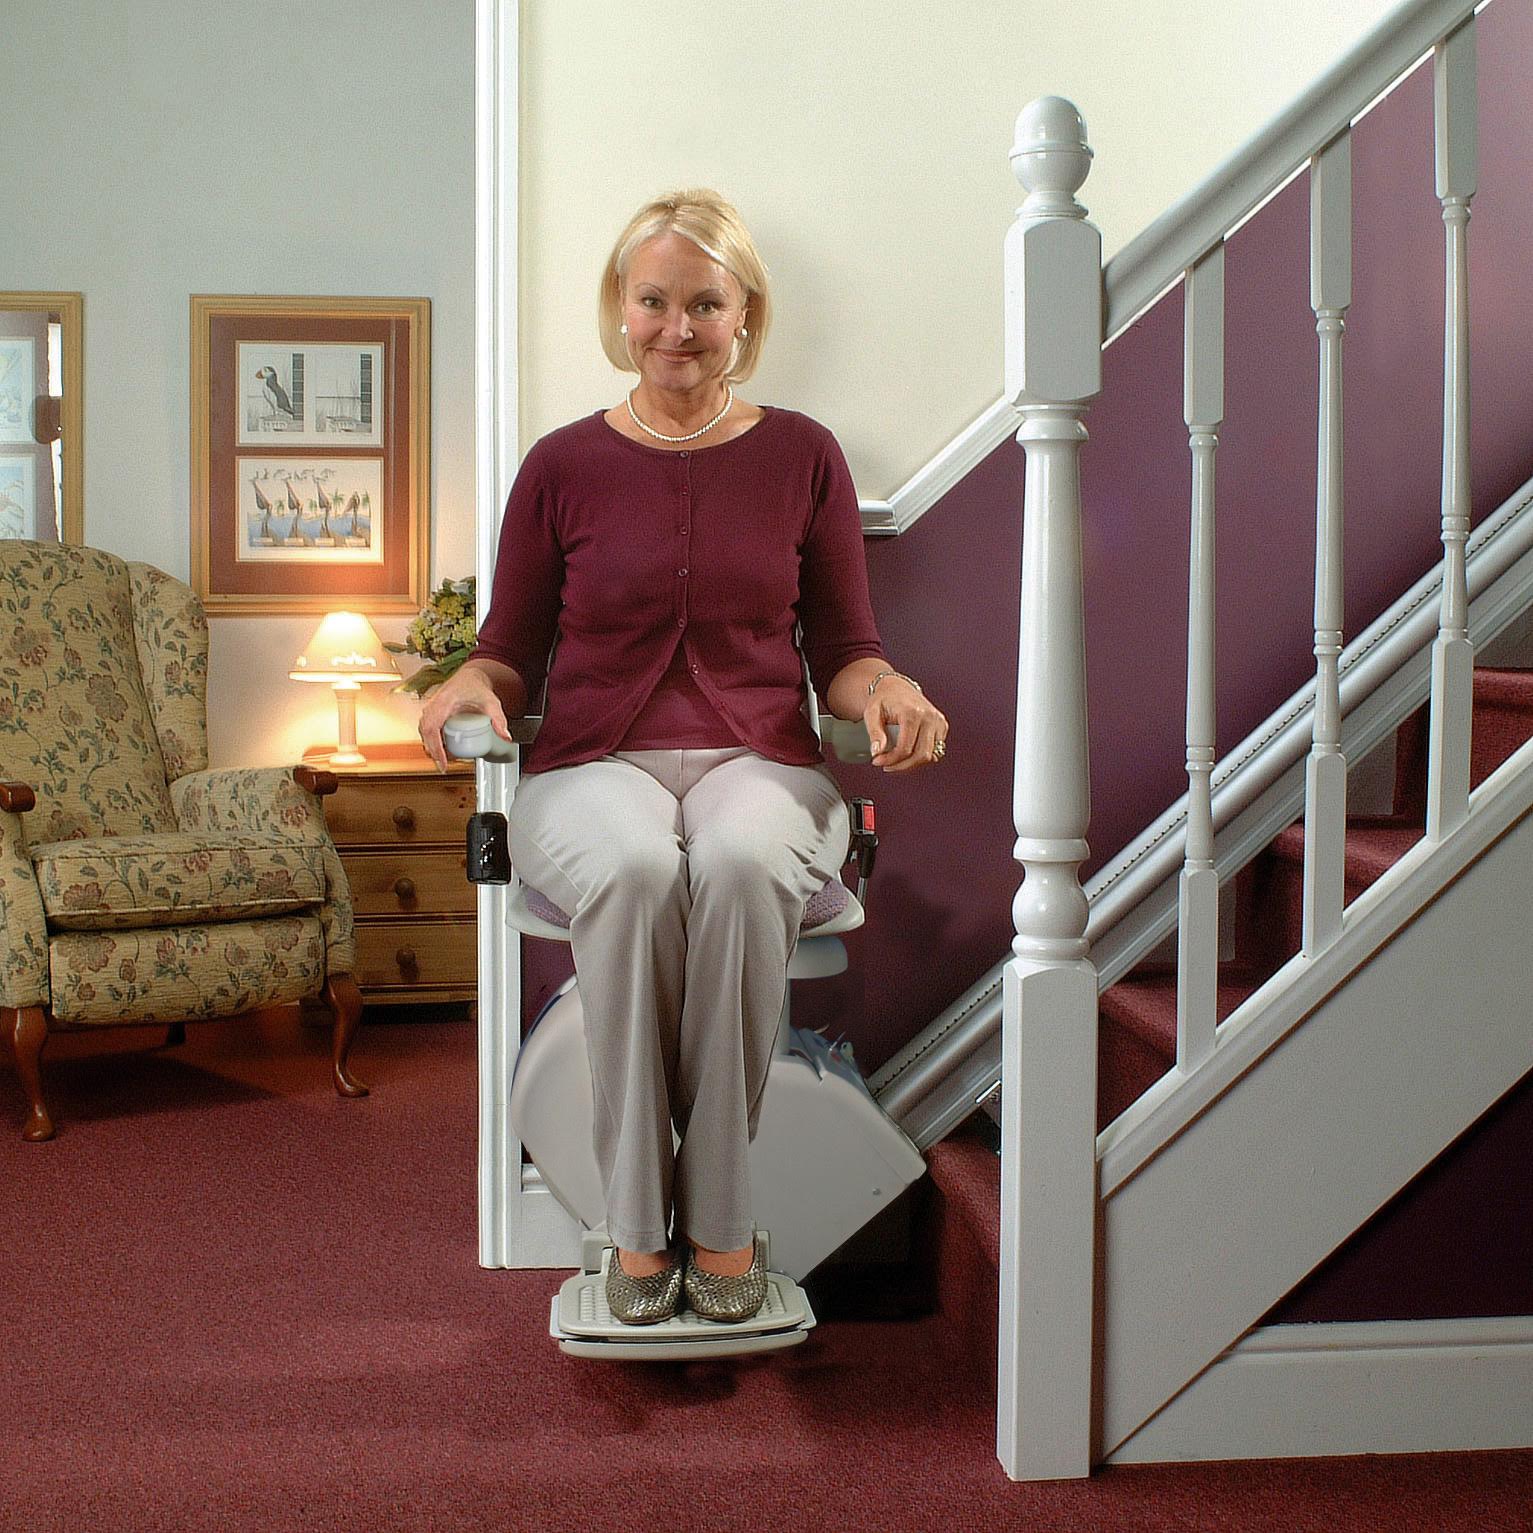 City Stair Lift are home residential indoor stairway staircase glides